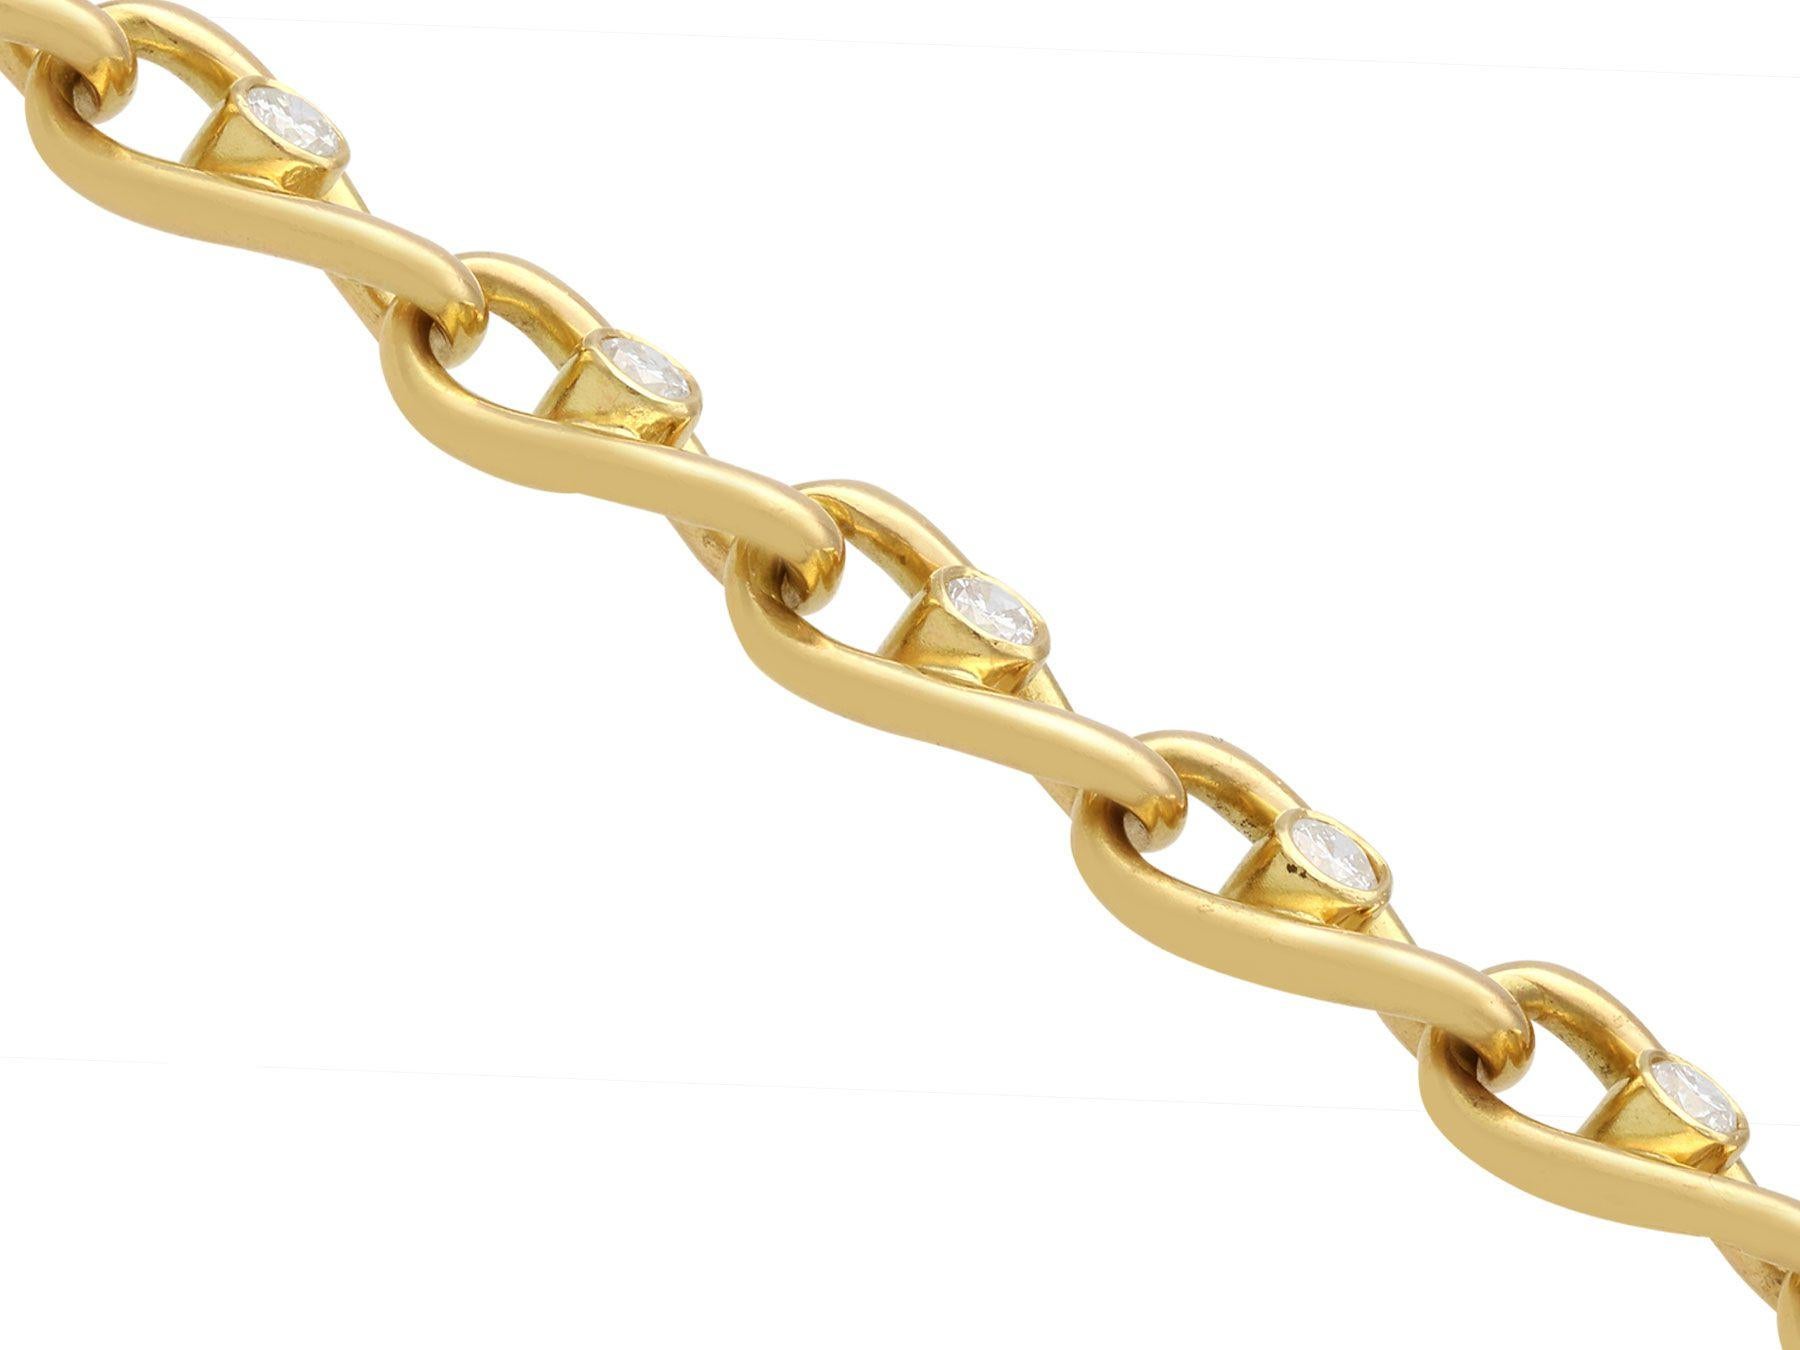 Women's 1960s Vintage 1.22 Carat Diamond and Yellow Gold Curb Bracelet For Sale